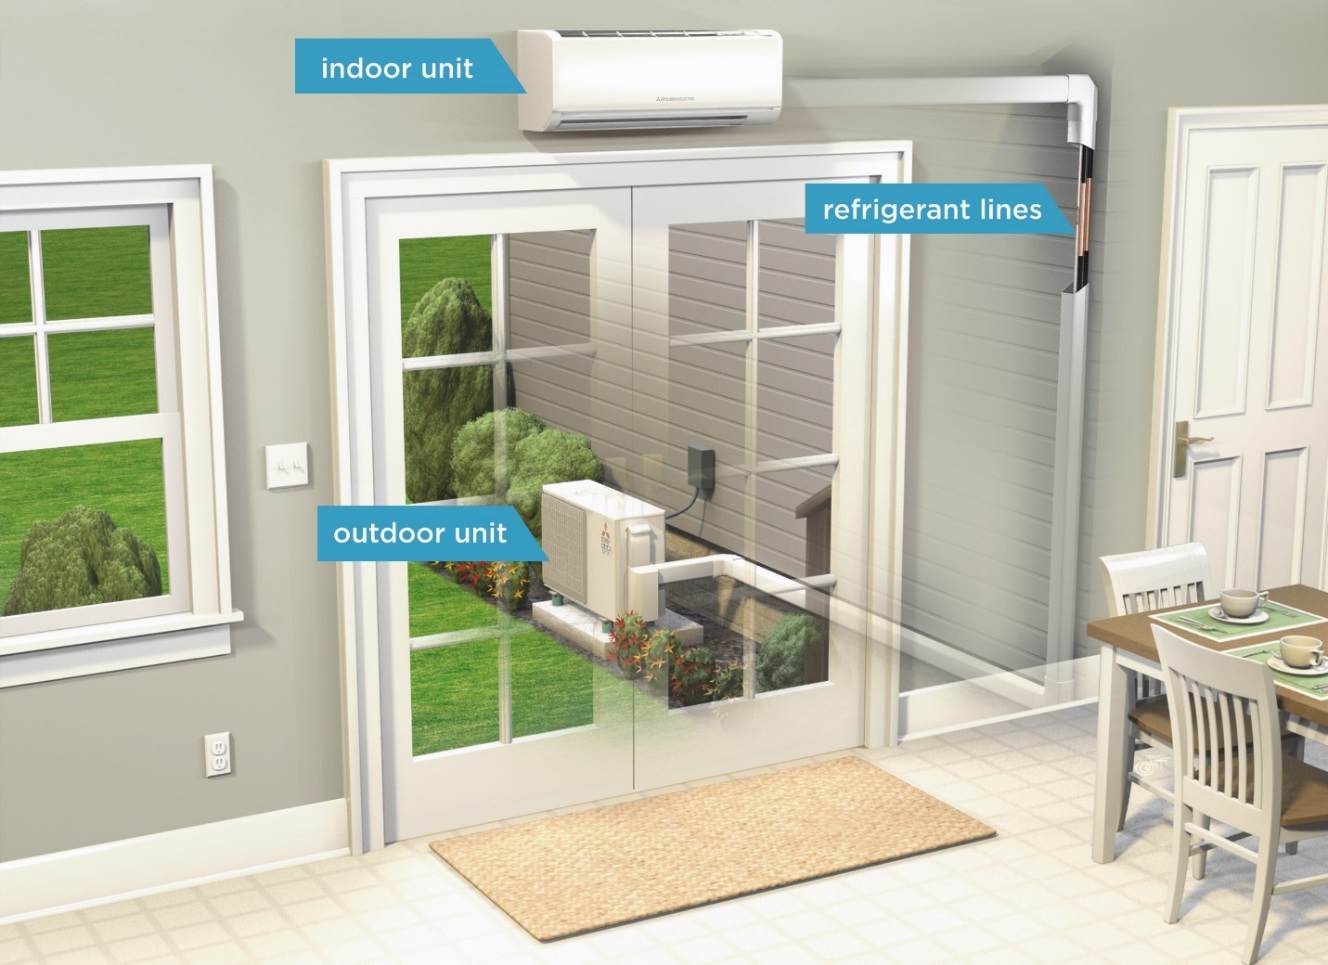 2020 Ductless Heating Cooling Cost Mini Split Prices Pros Cons